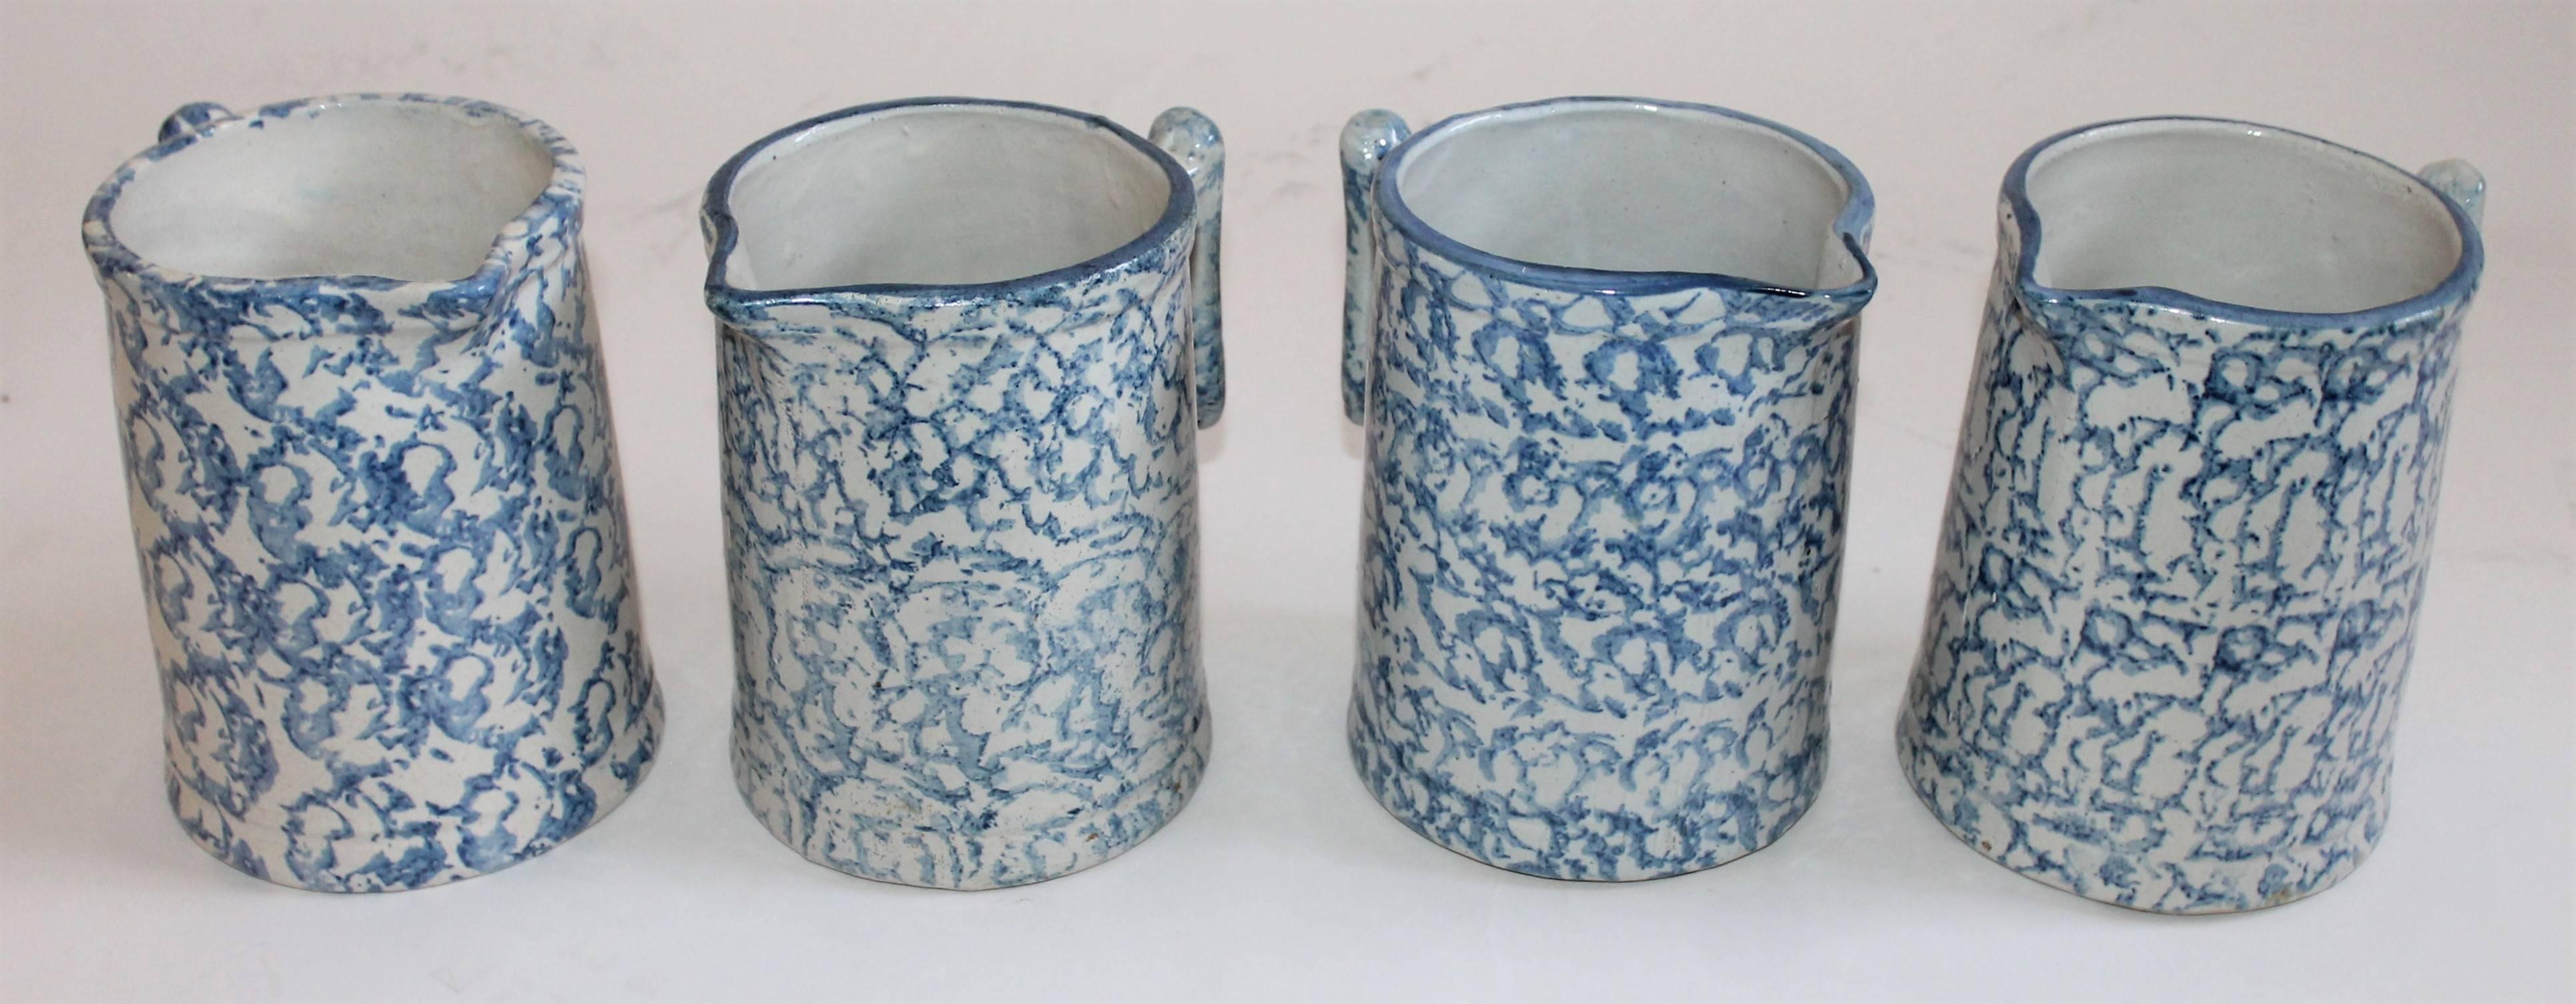 Collection of four pristine condition 19th century sponge ware milk pitchers. This is such a fine group of pottery pitchers in great light blue colors.